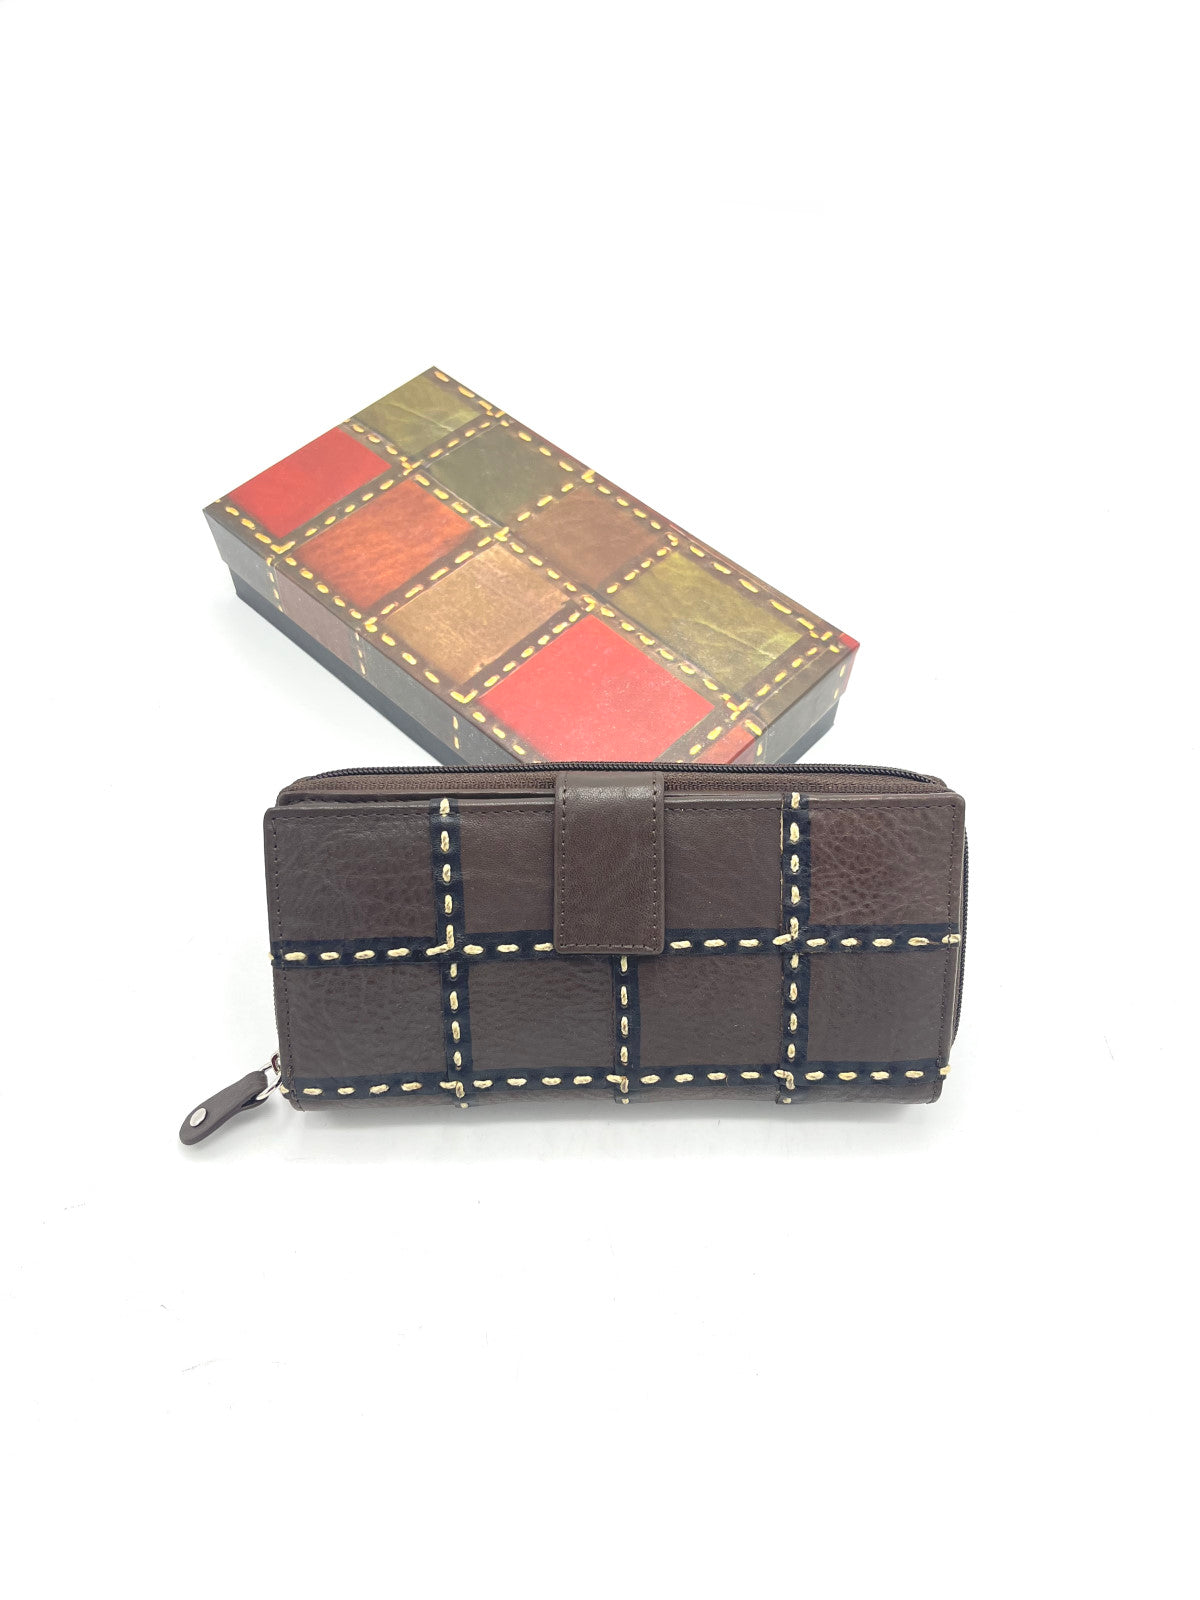 Genuine washed leather wallet, for women, art. BV206.479